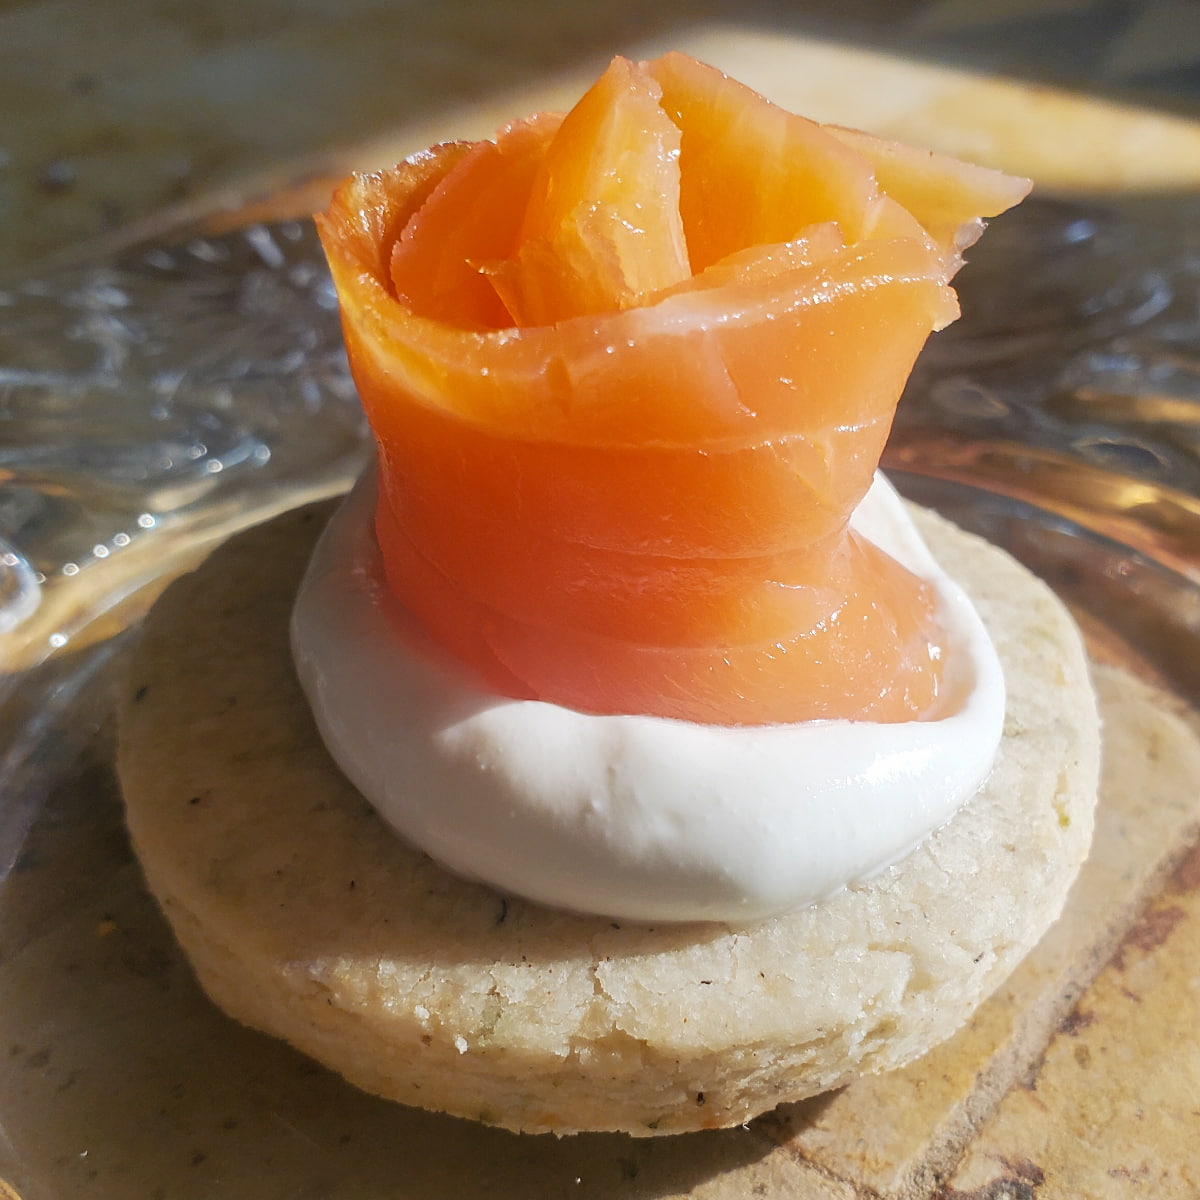 Smoked salmon with sour cream on a rosemary parmesan cracker from cleveland cooking.